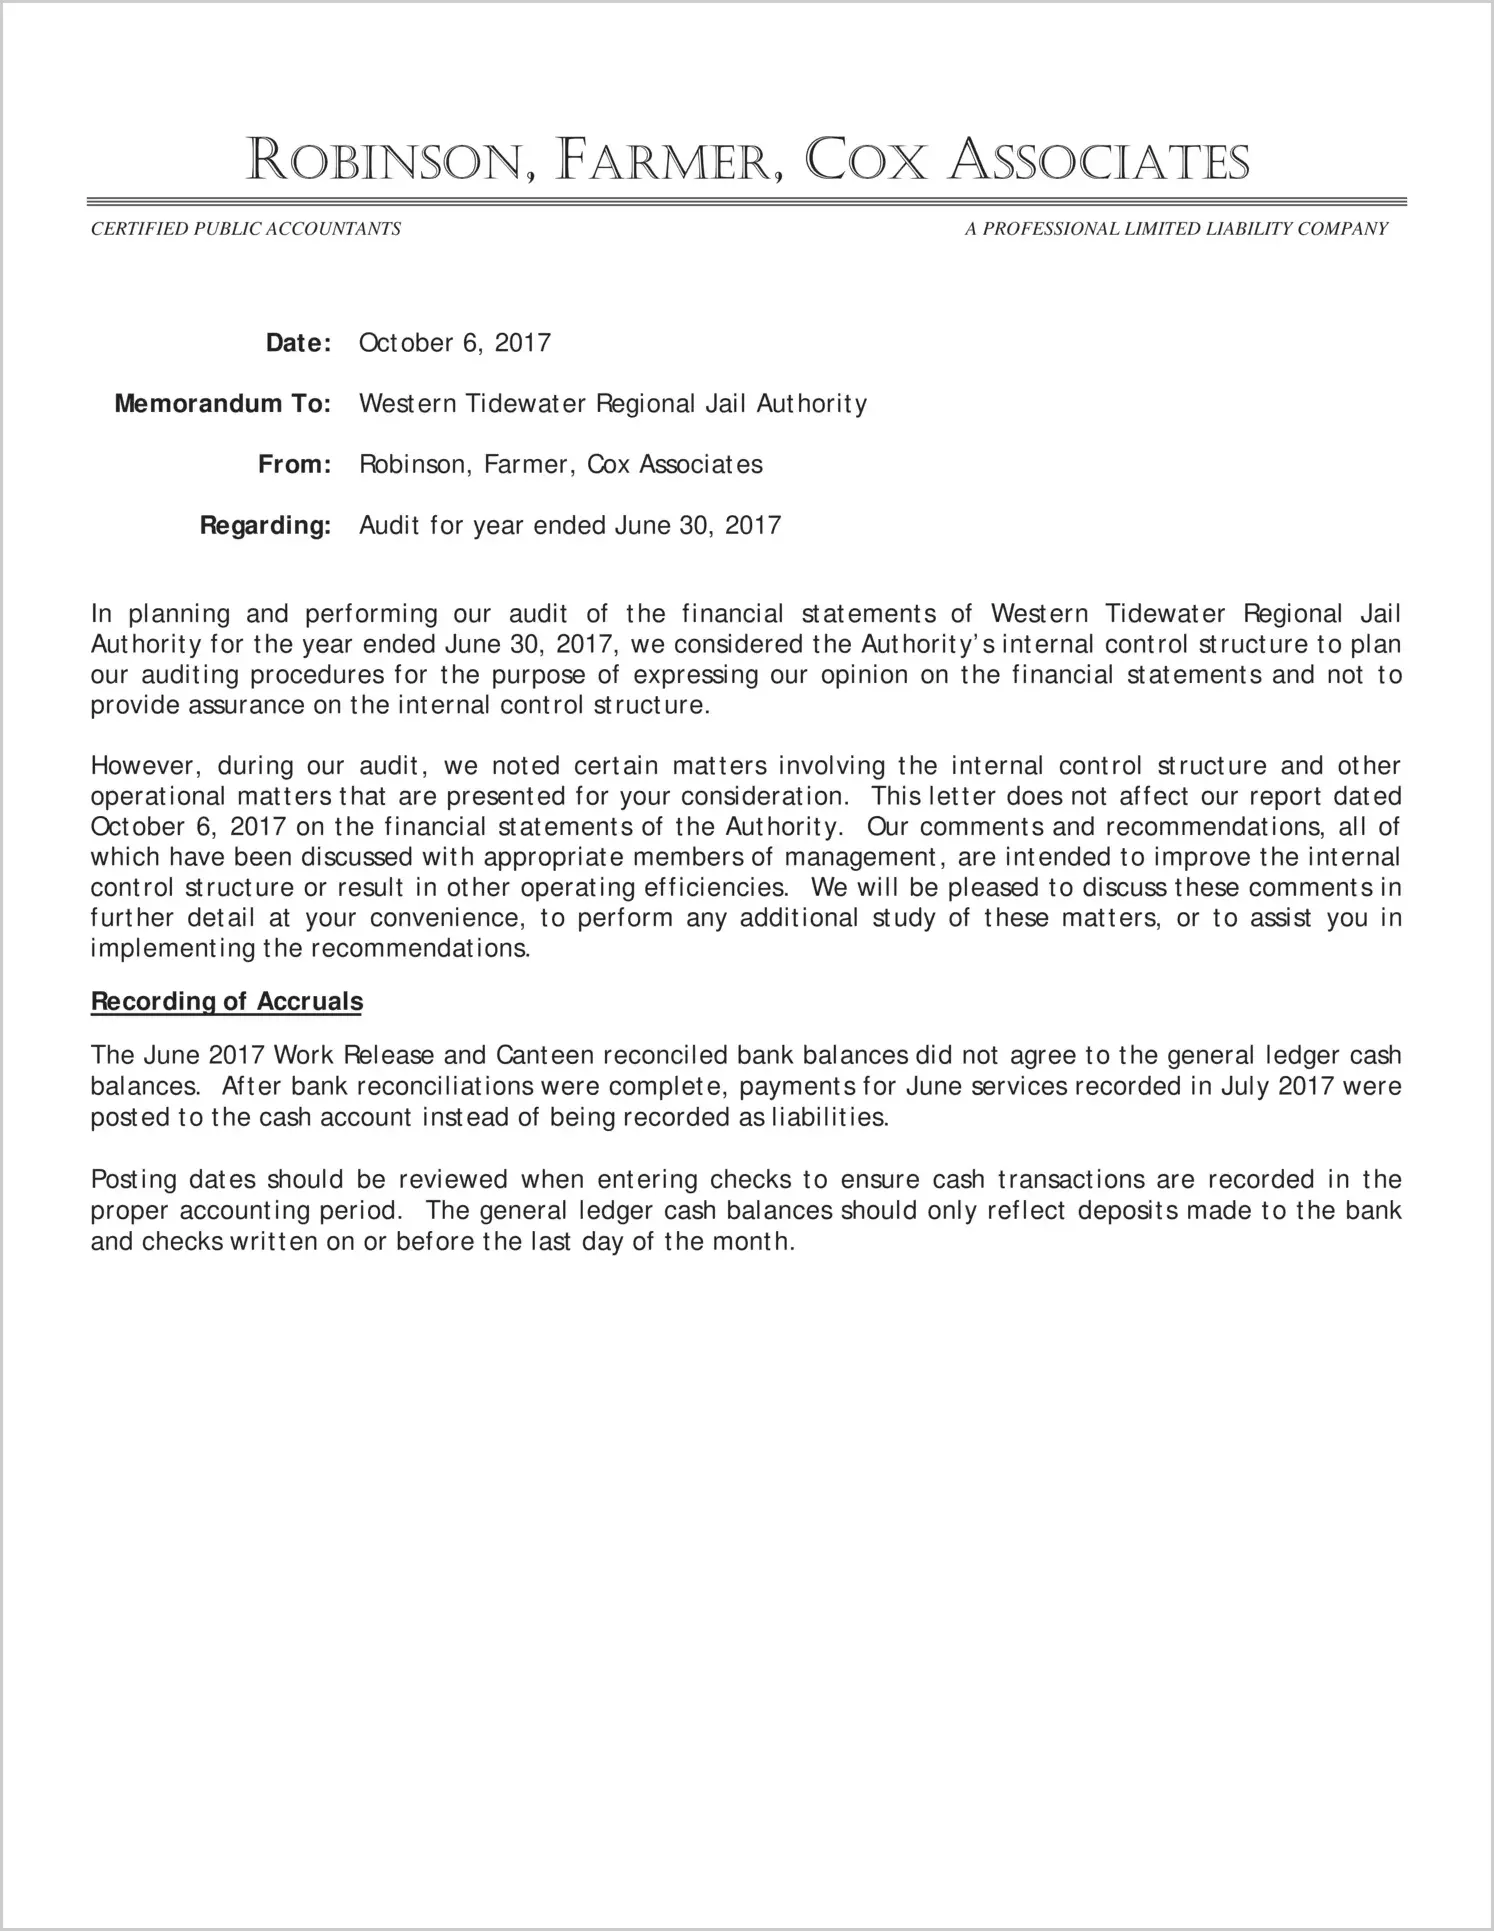 2017 ABC/Other Management Letter for Western Tidewater Regional Jail Authority